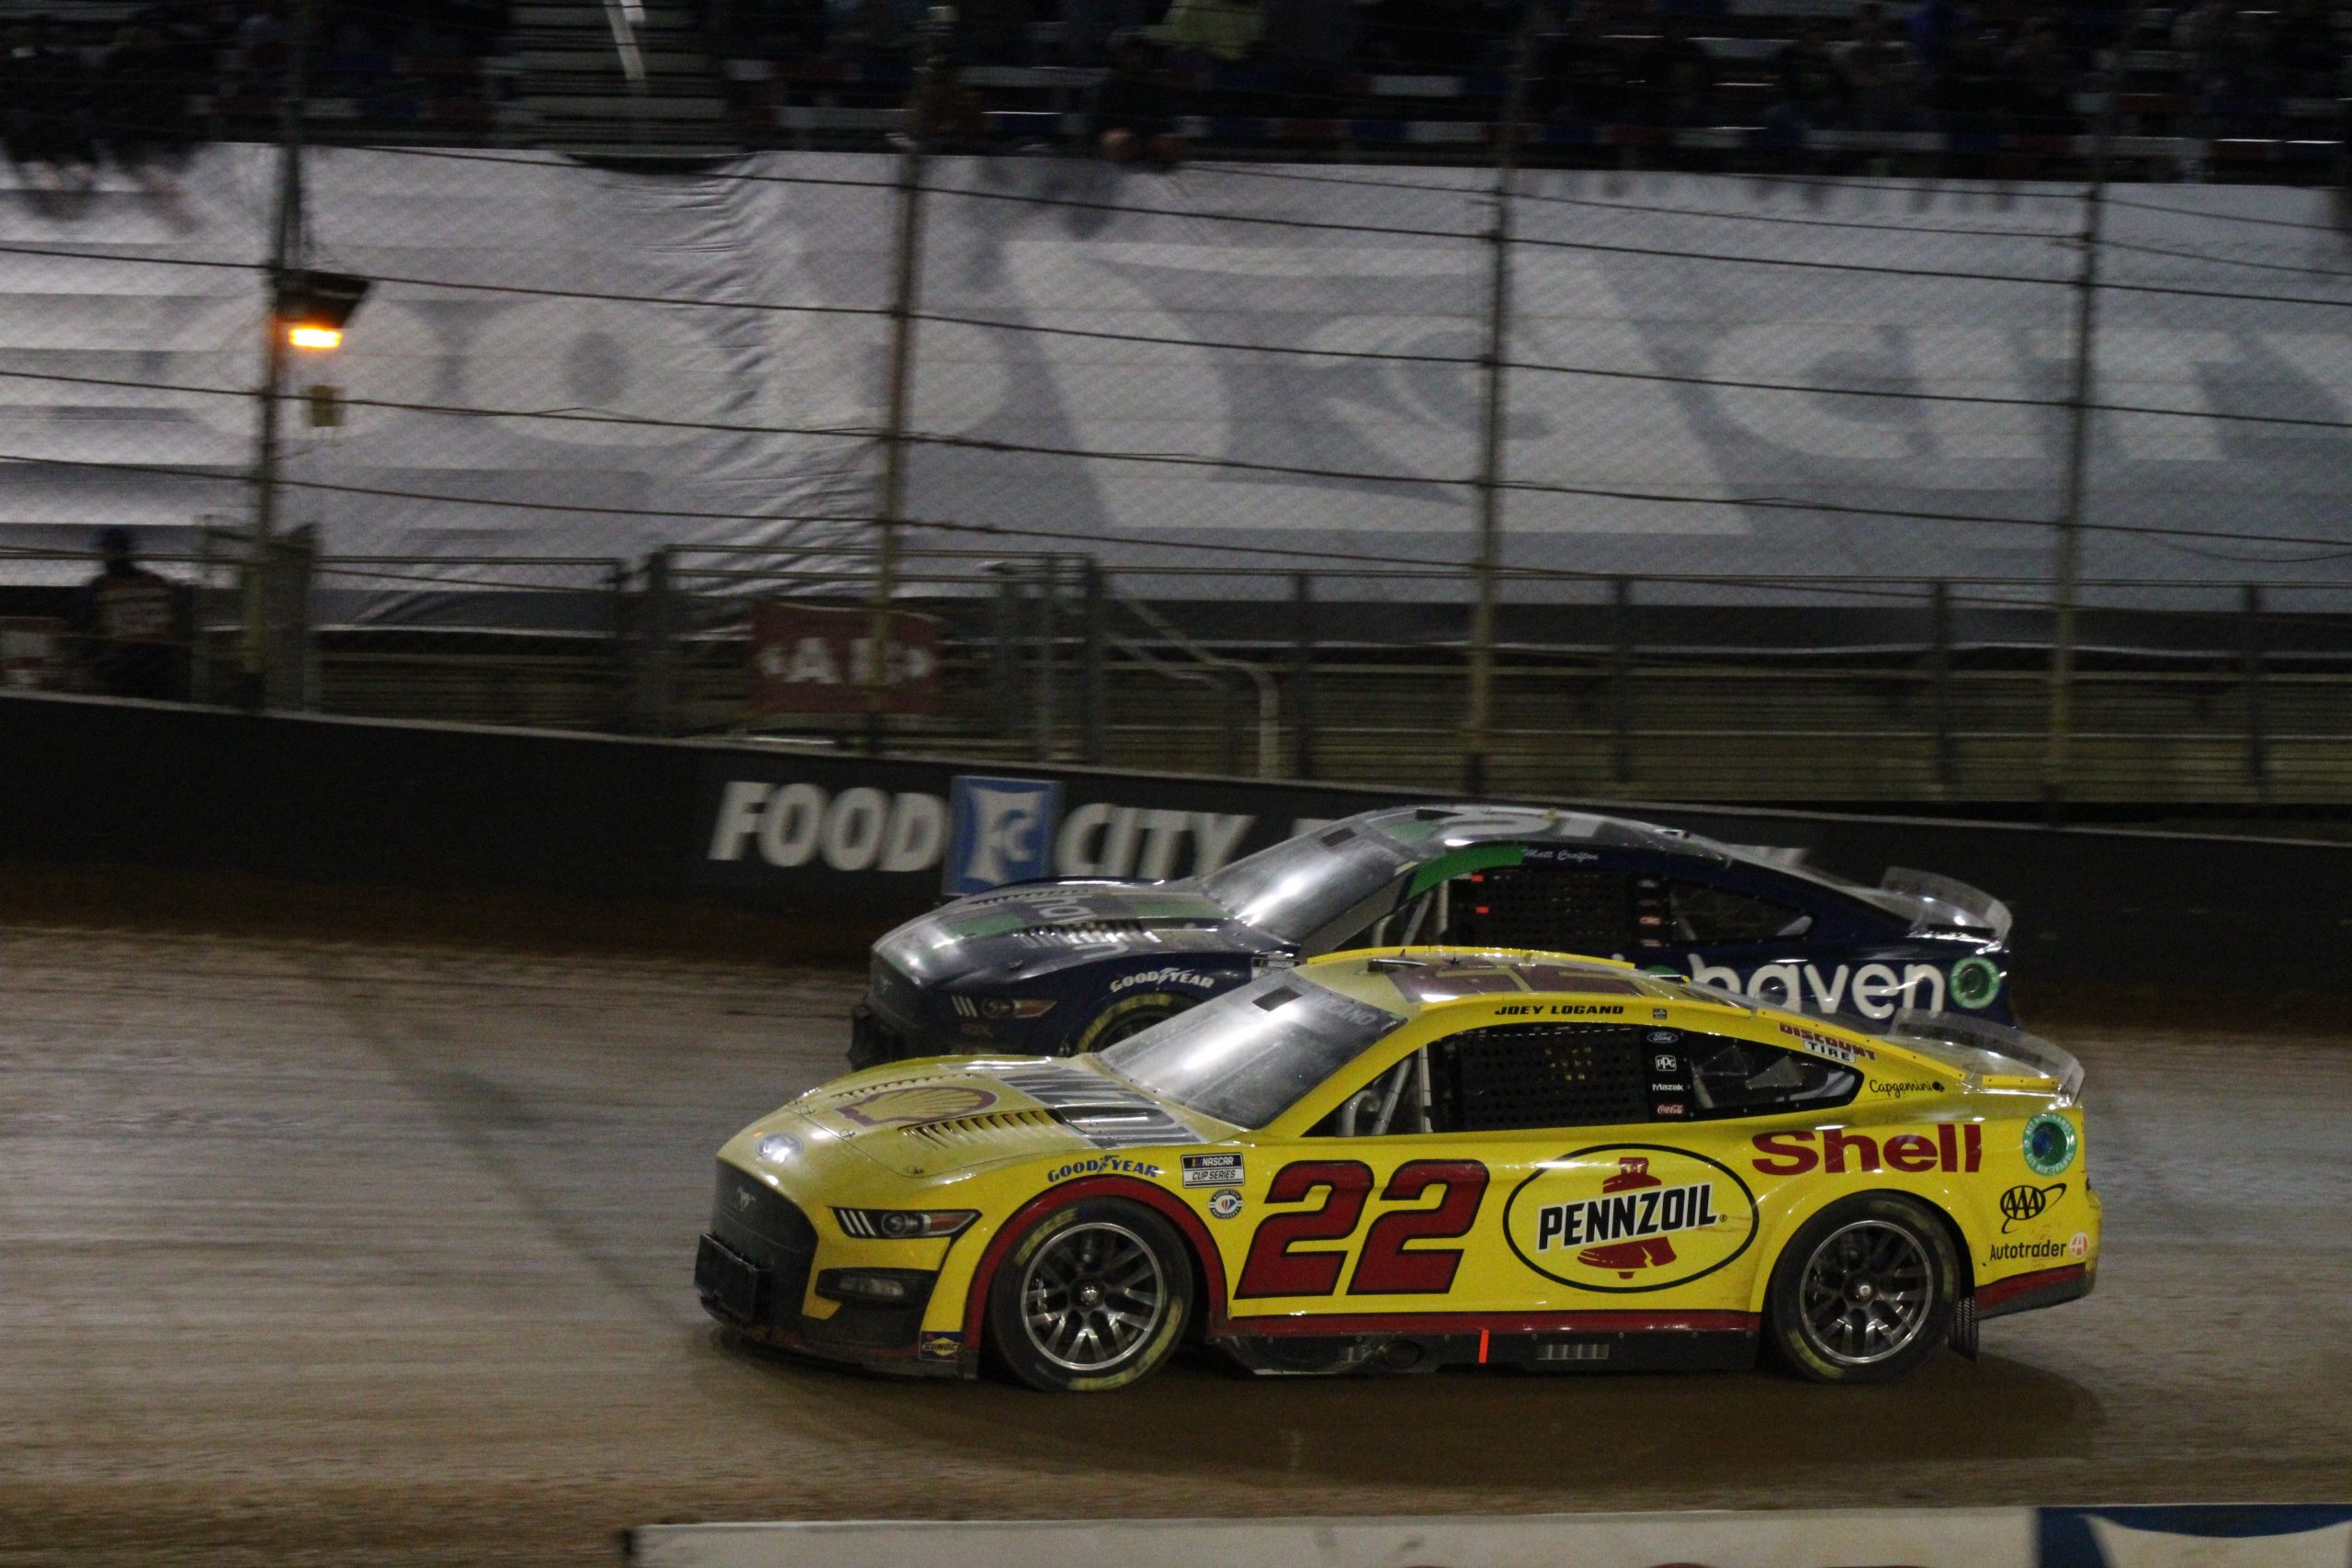 A rally by Logano was not in the cards at the Bristol Dirt track. (Photo: Trish McCormack | The Podium Finish)